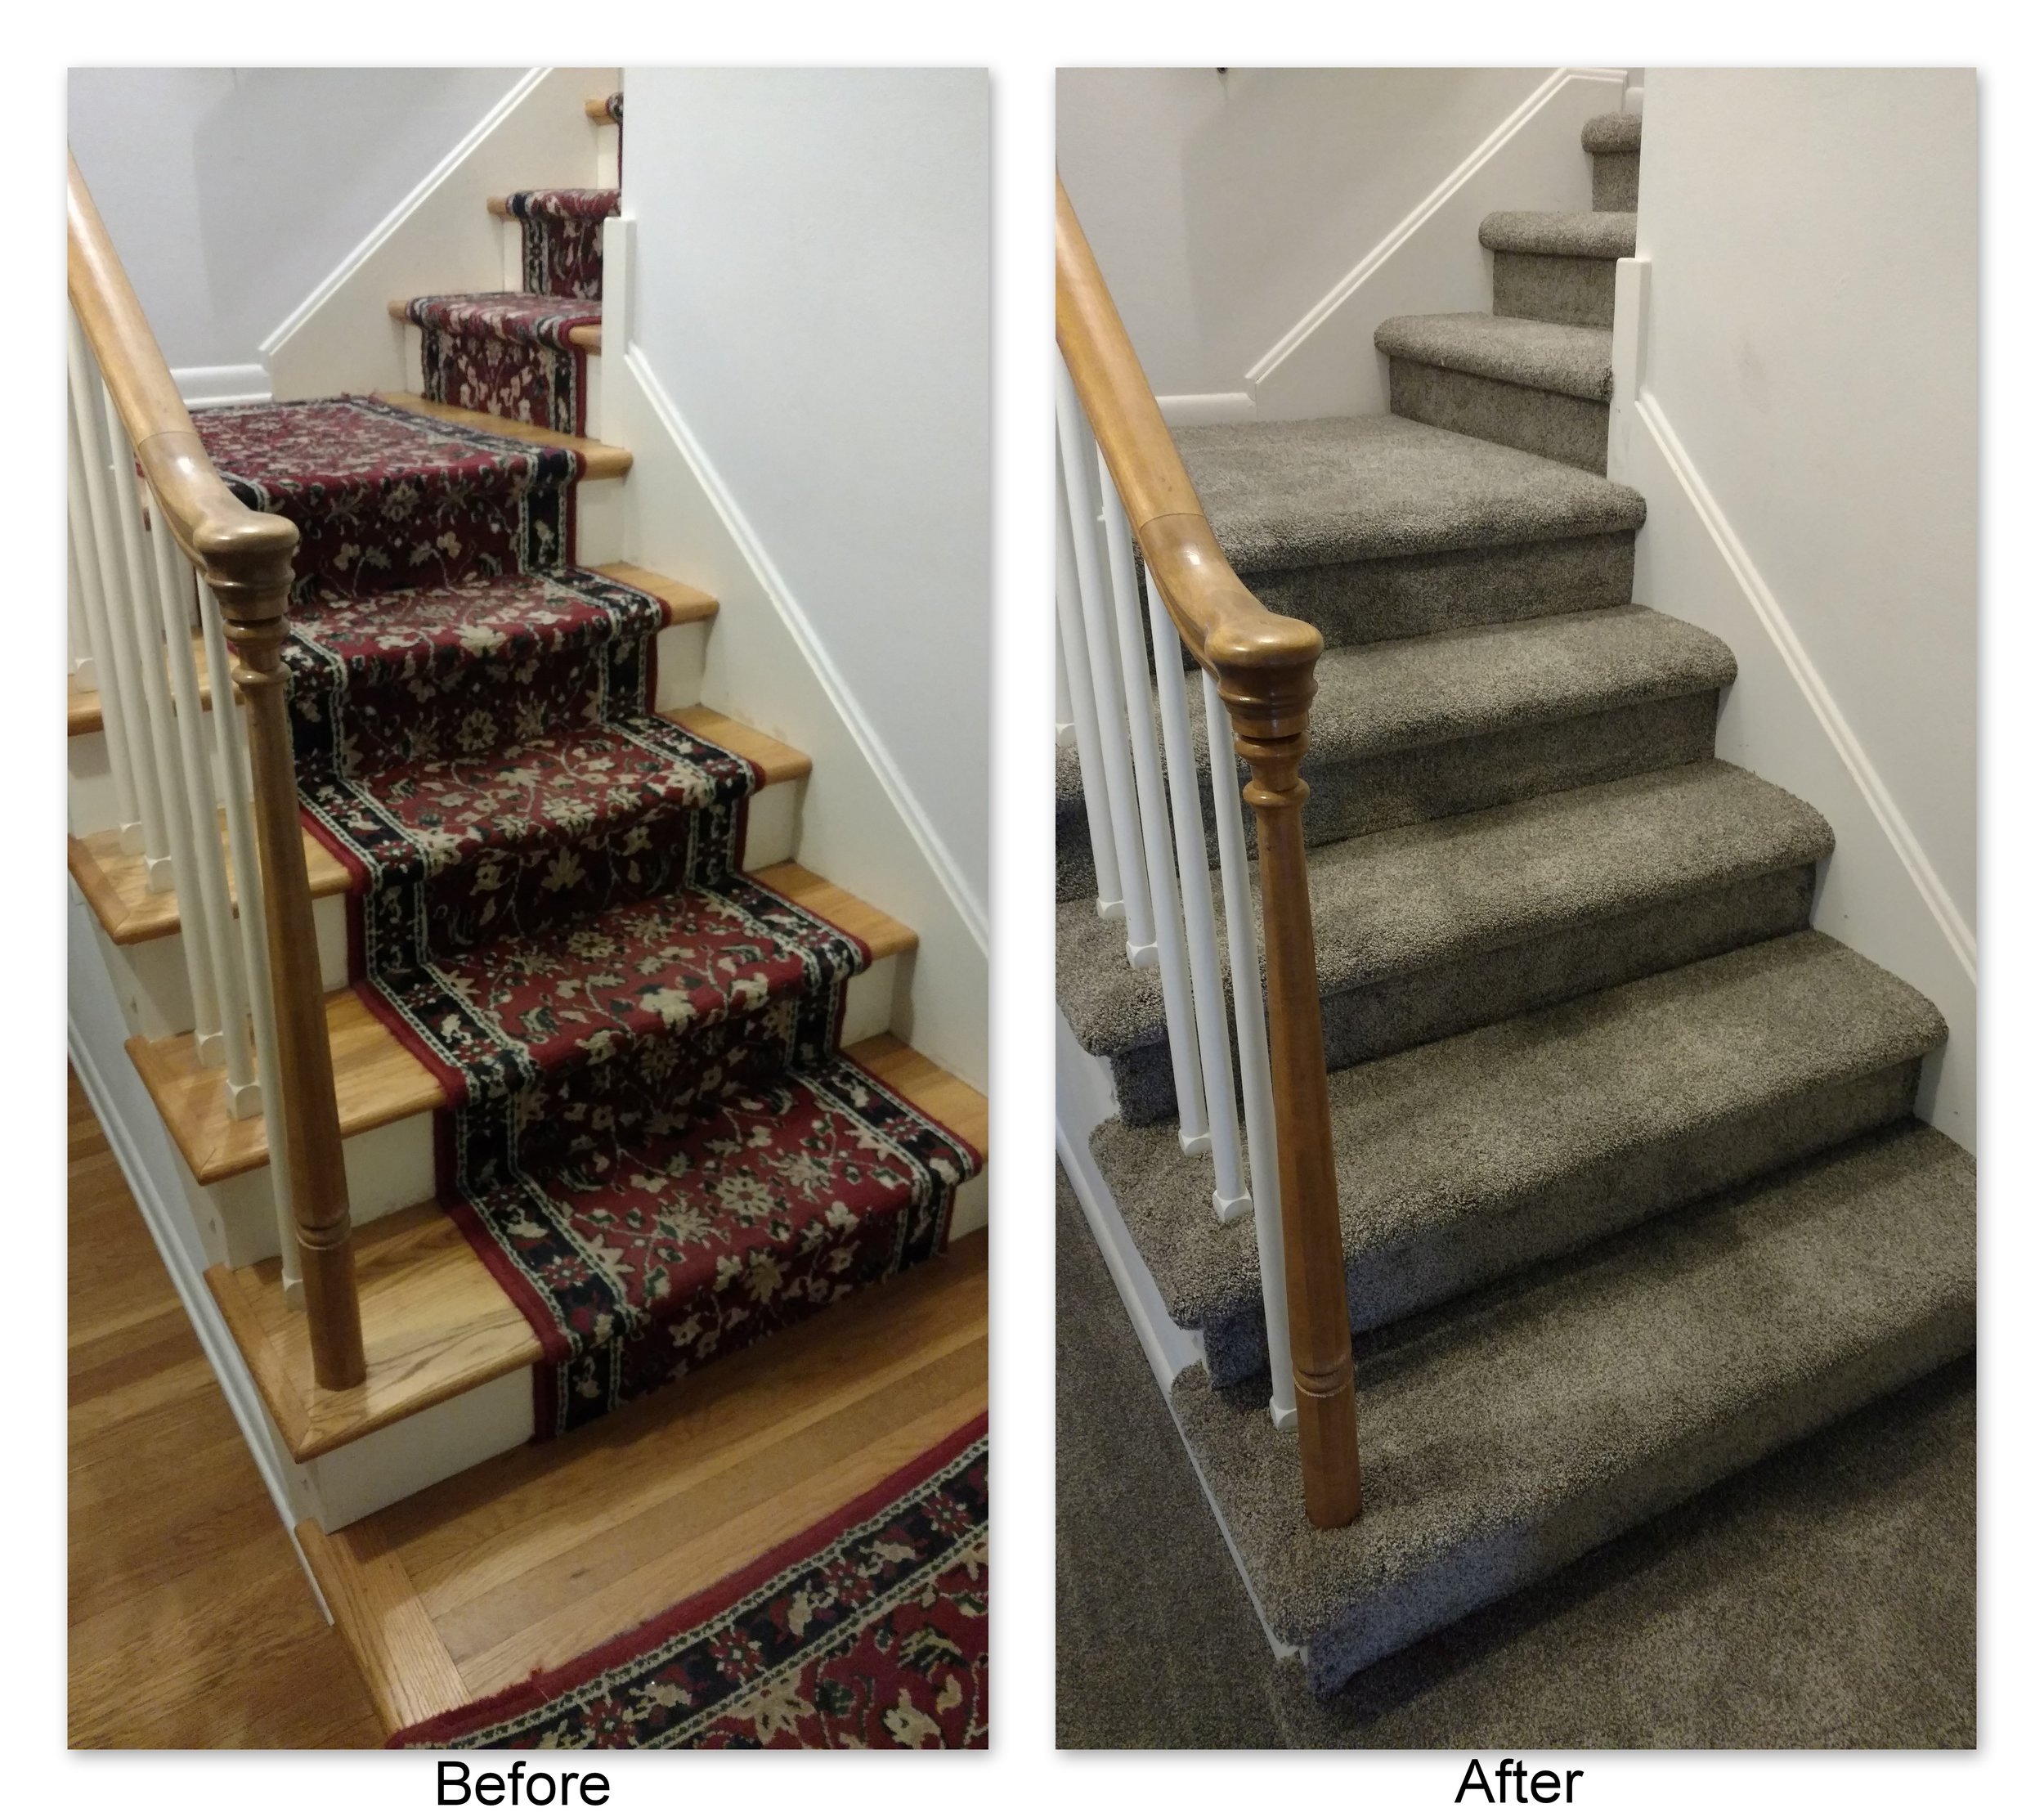 Frank & Tonya's Update from Old/Crooked Carpet Runners and 70s Red Carpet  to Classy Modern Style - Elizabethtown Flooring